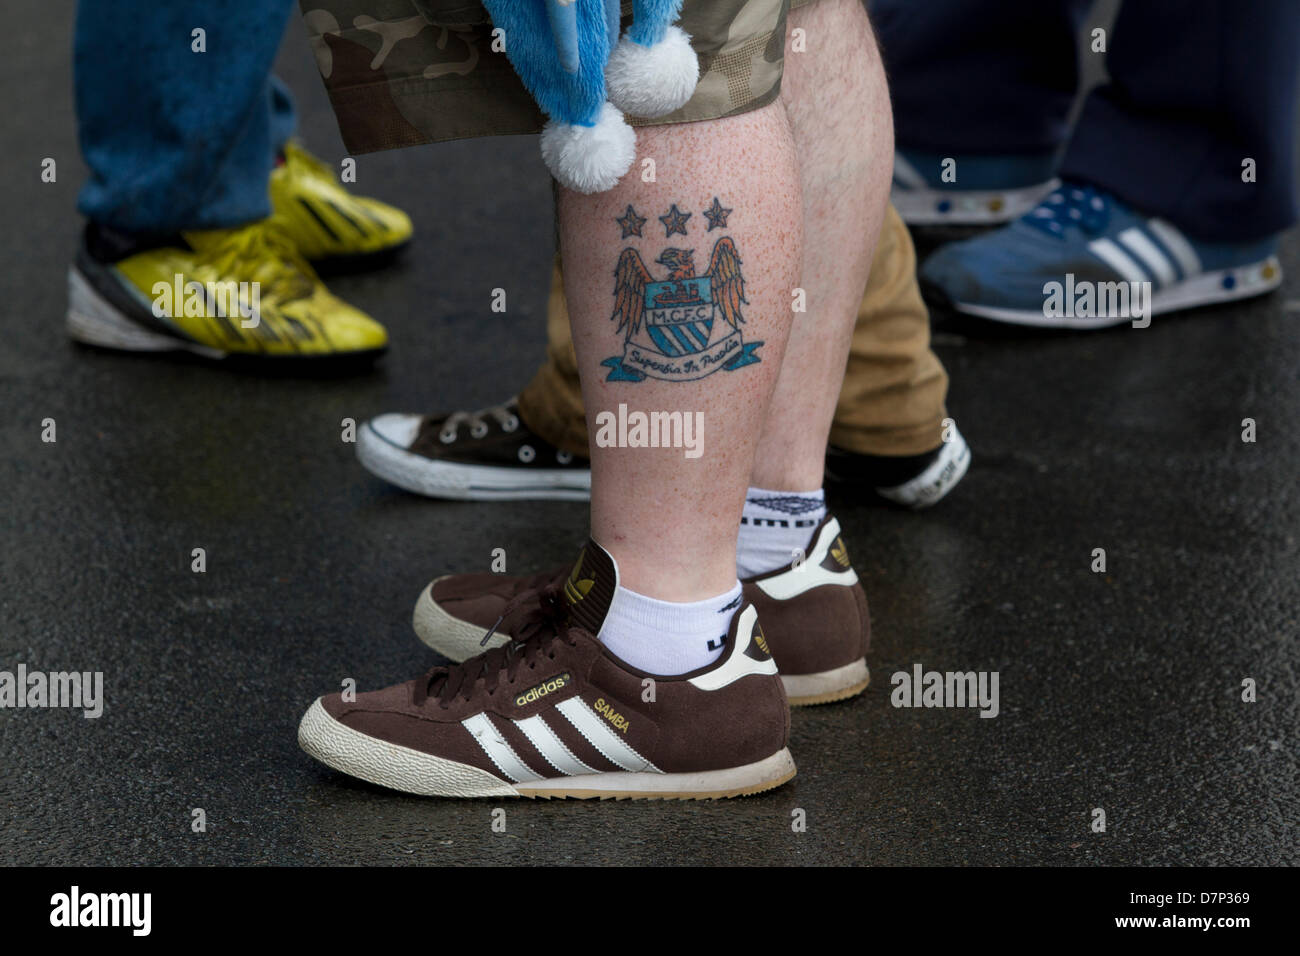 Wembley, London, UK. 11th May 2013. A football supporter with a tattoo of  the Manchester City team crest on his leg. Thousands of fans from greater  Manchester descend on Wembley stadium for